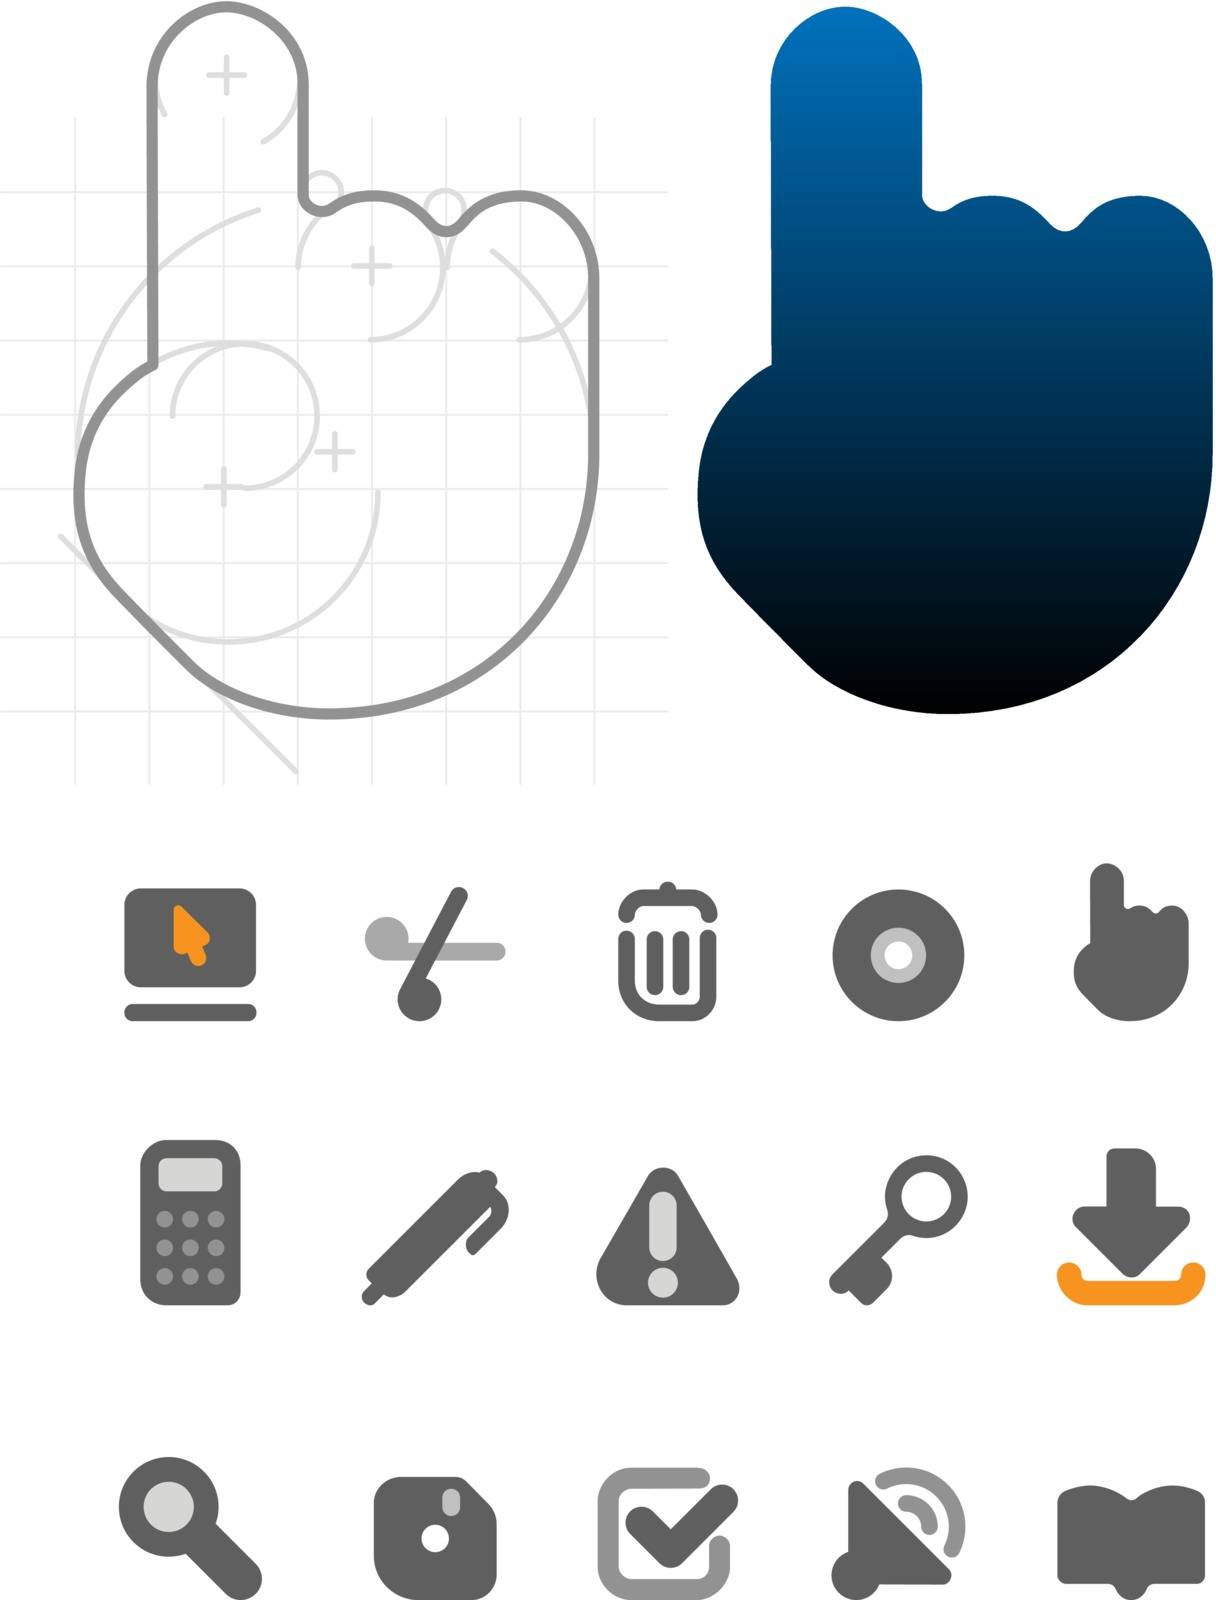 Designer's icons for website and computer interface. Vector illustration.